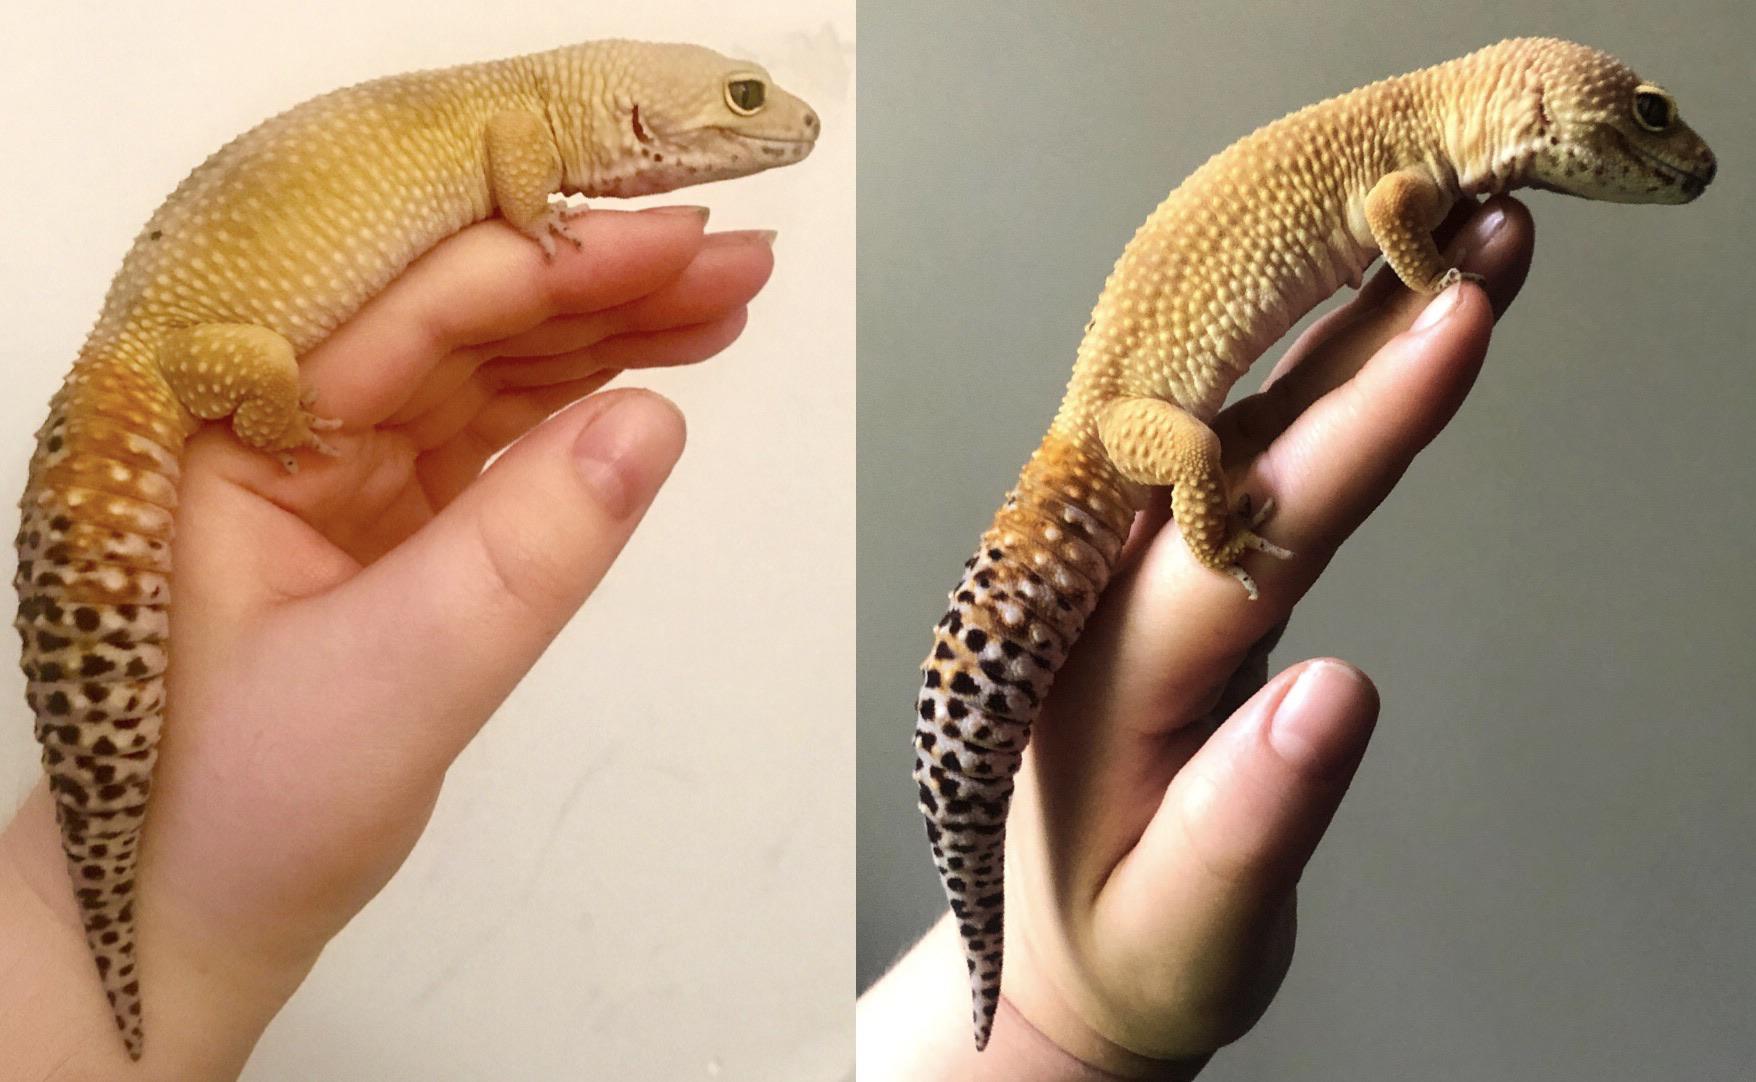 before and after of a lizard named alexander after he lost weight  